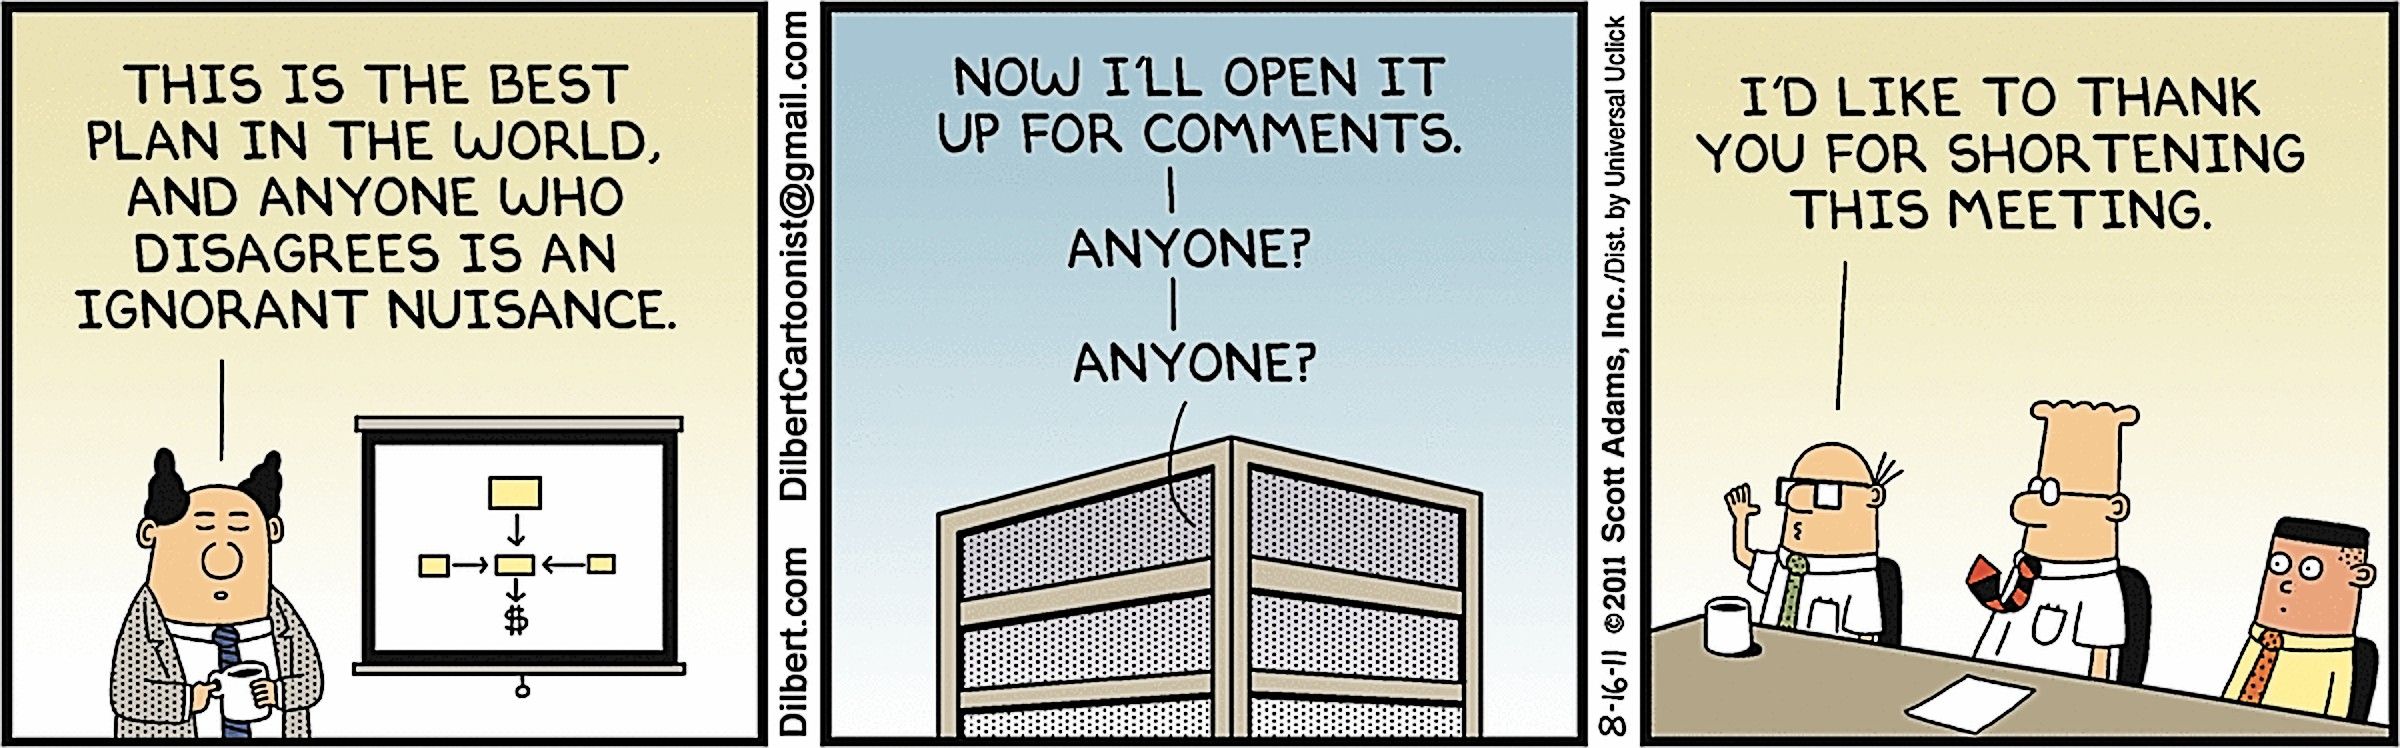 Dilbert, "I'd like to thank you for shortening this meeting"